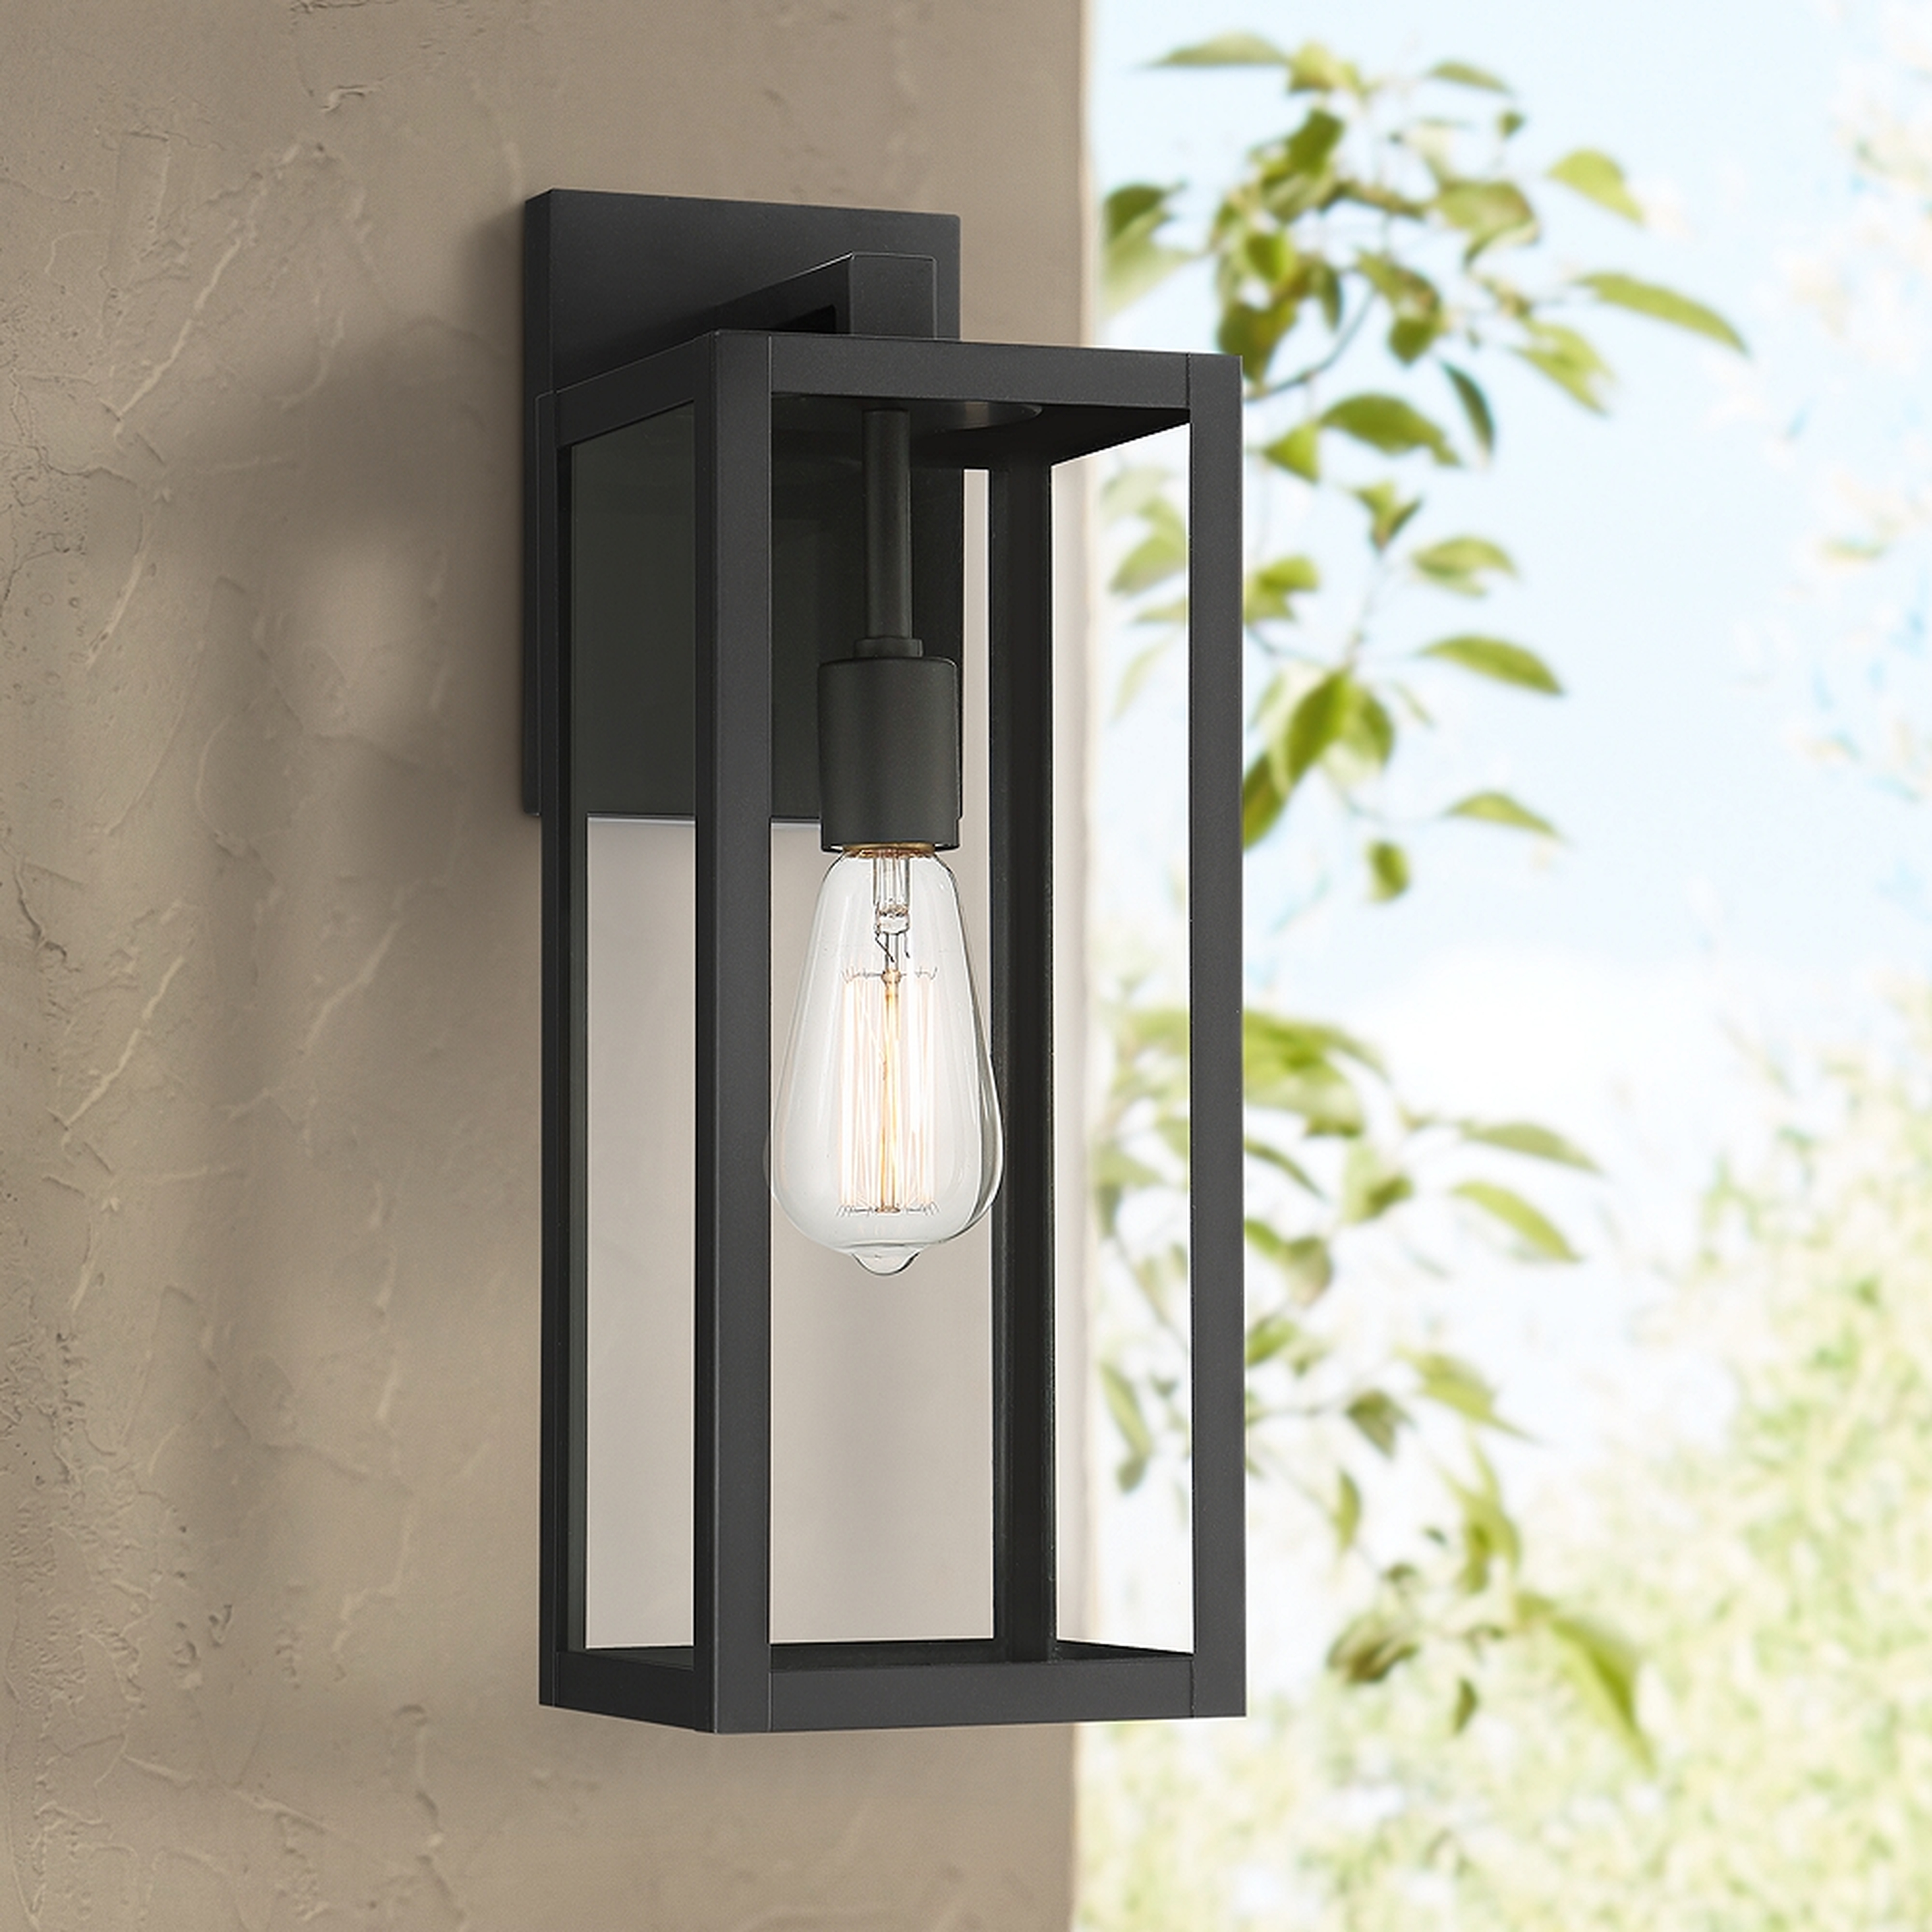 Titan 17" High Mystic Black Outdoor Wall Light - Style # 98Y72 - Lamps Plus